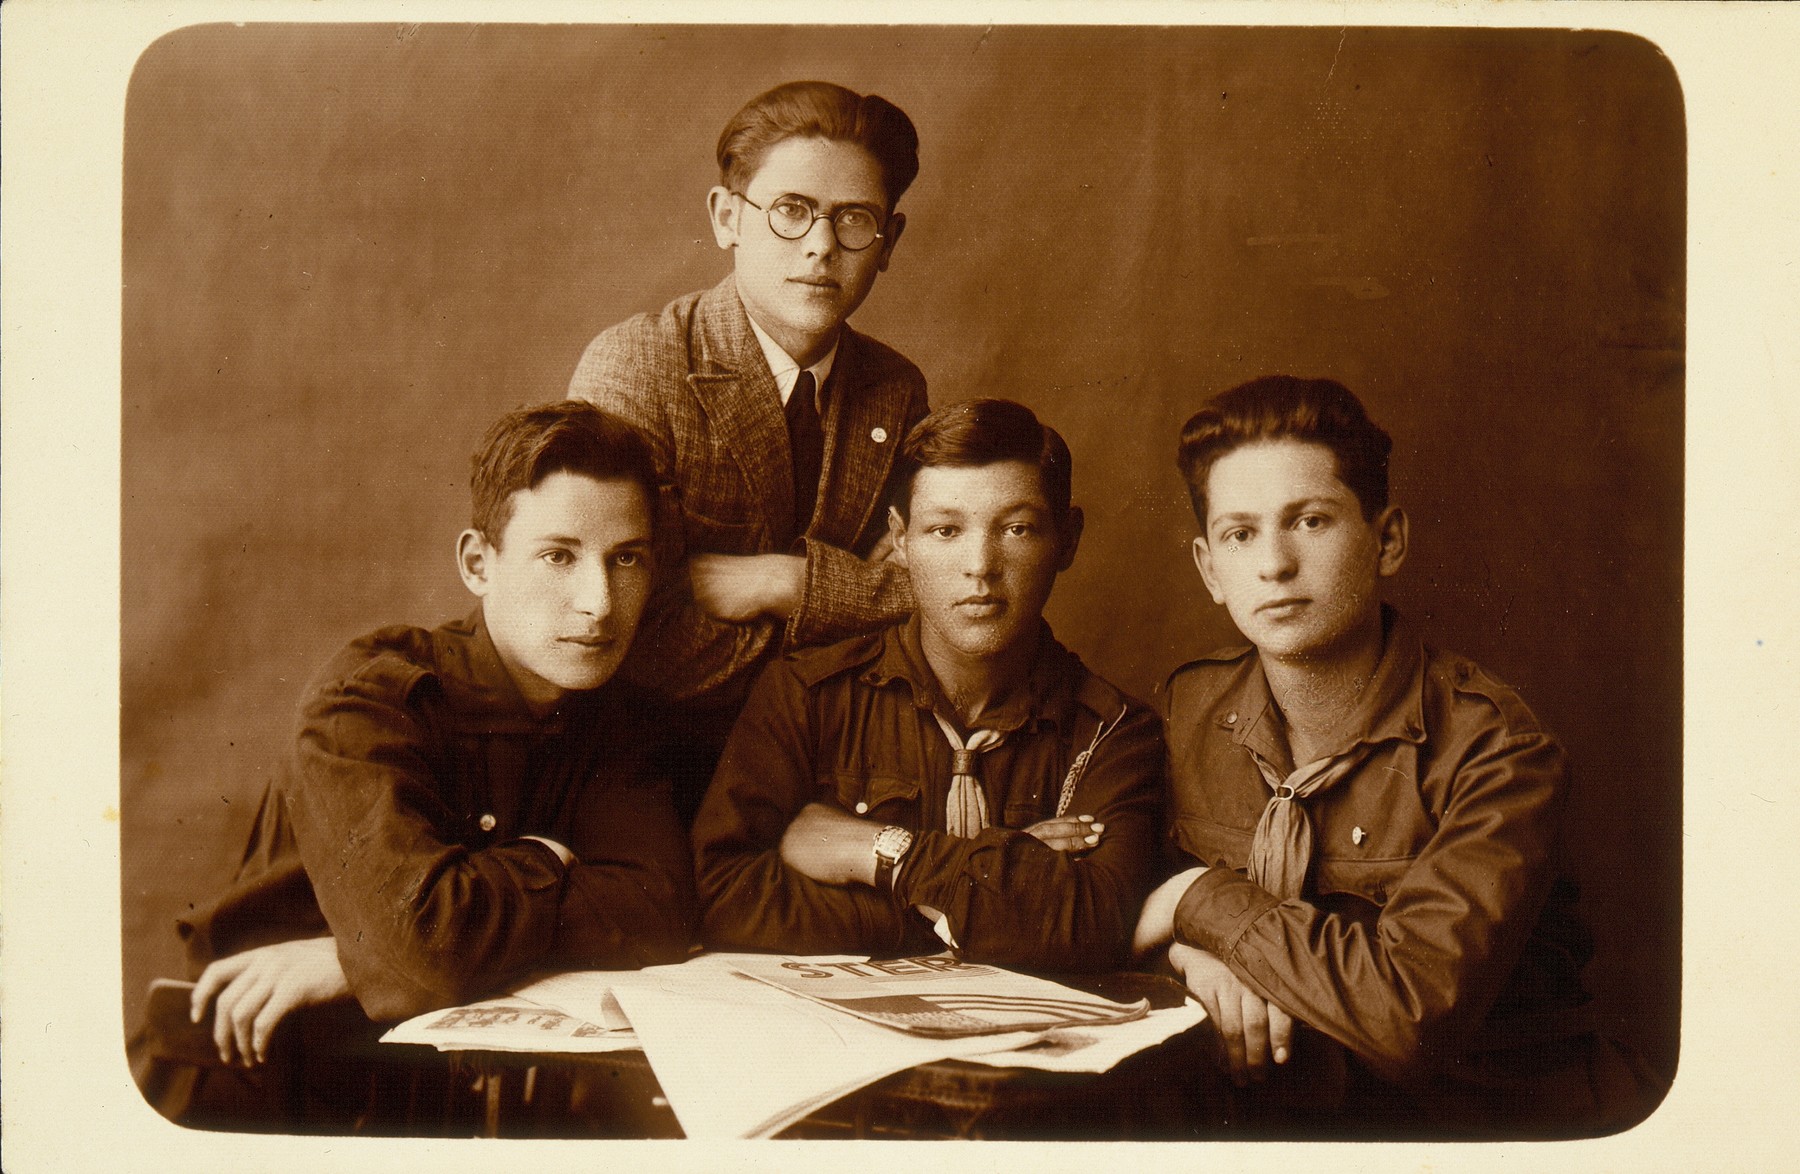 Four young members of the Betar youth movement gather around a table strewn with newspapers. 

Faivl Glombocki (sitting in center), on his right is Dov Wilenski, on his left Hanan Polaczek, and a friend  (standing) from Chiznistock, Vilna. Dov immigrated to Palestine.  Faivl came to Argentina in 1930 with his family and later immigrated to Israel.